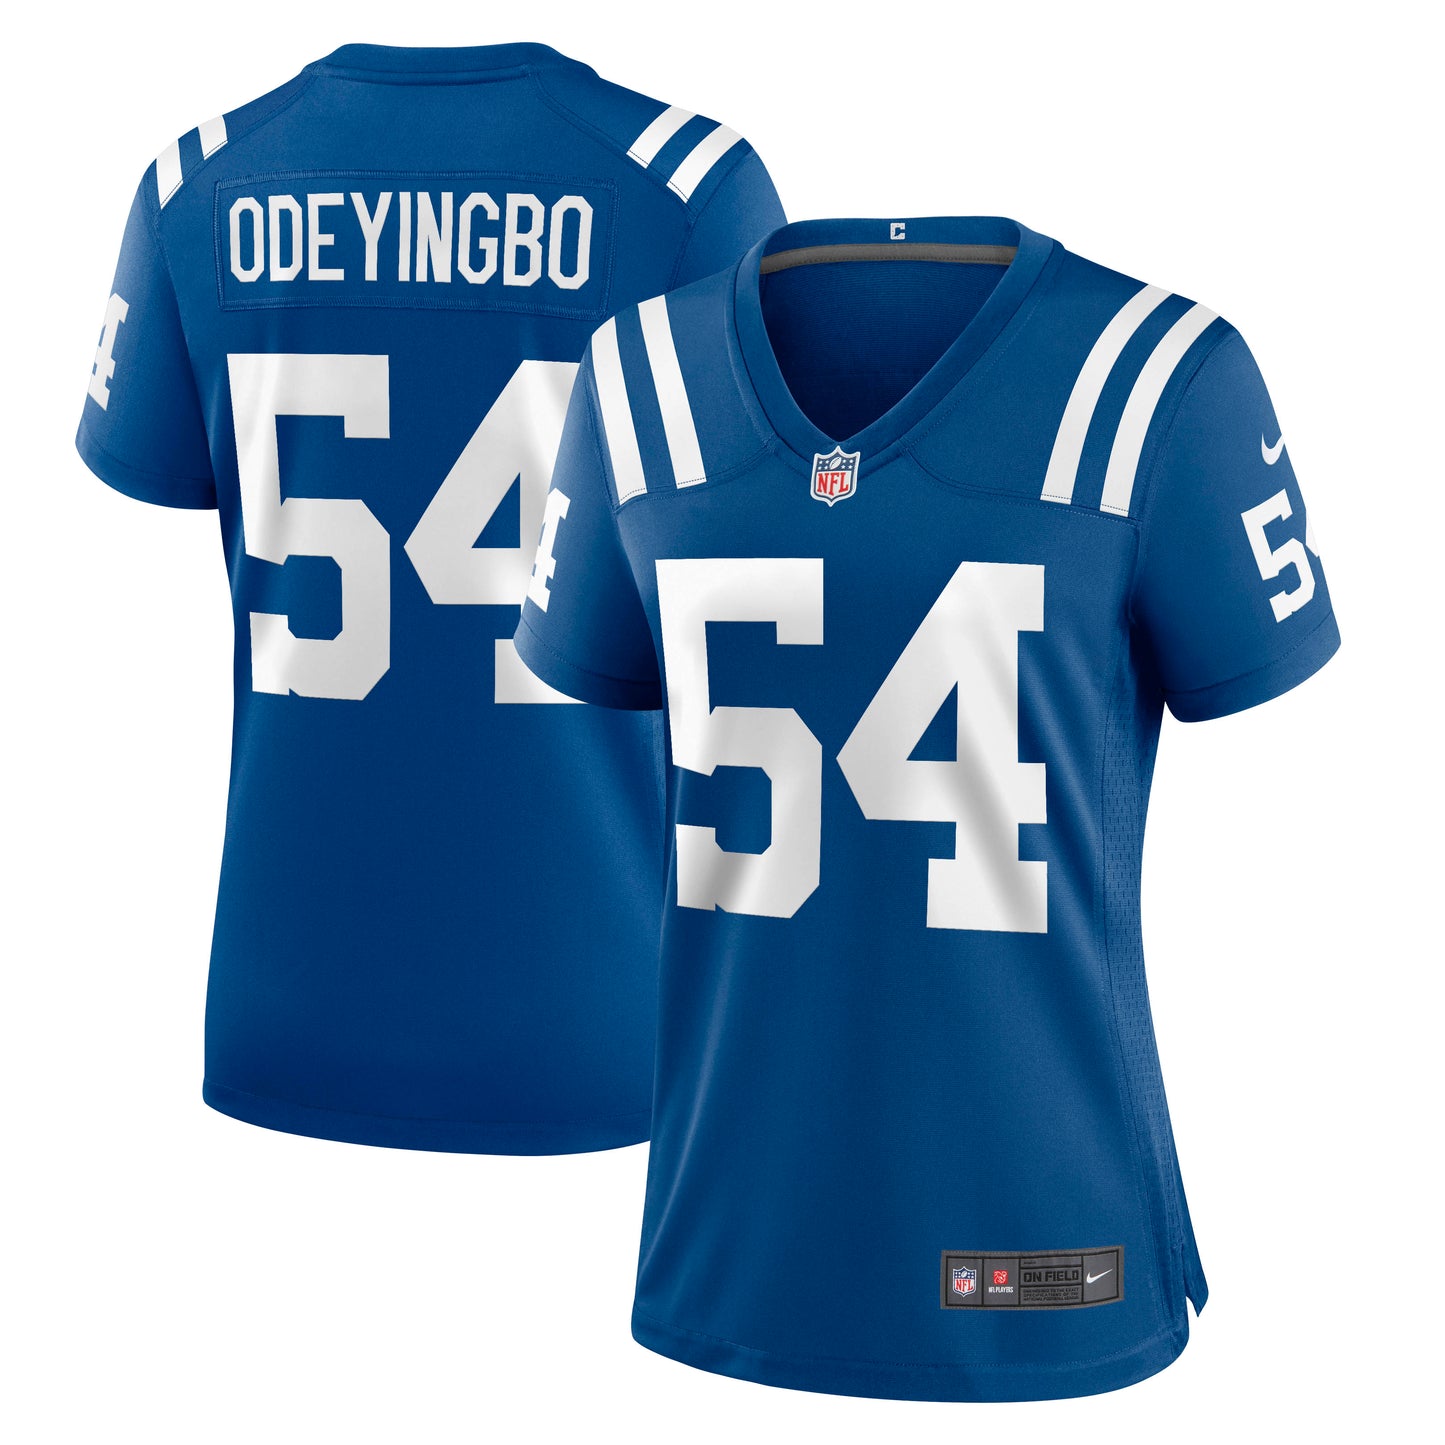 Dayo Odeyingbo Indianapolis Colts Nike Women's Game Jersey - Royal